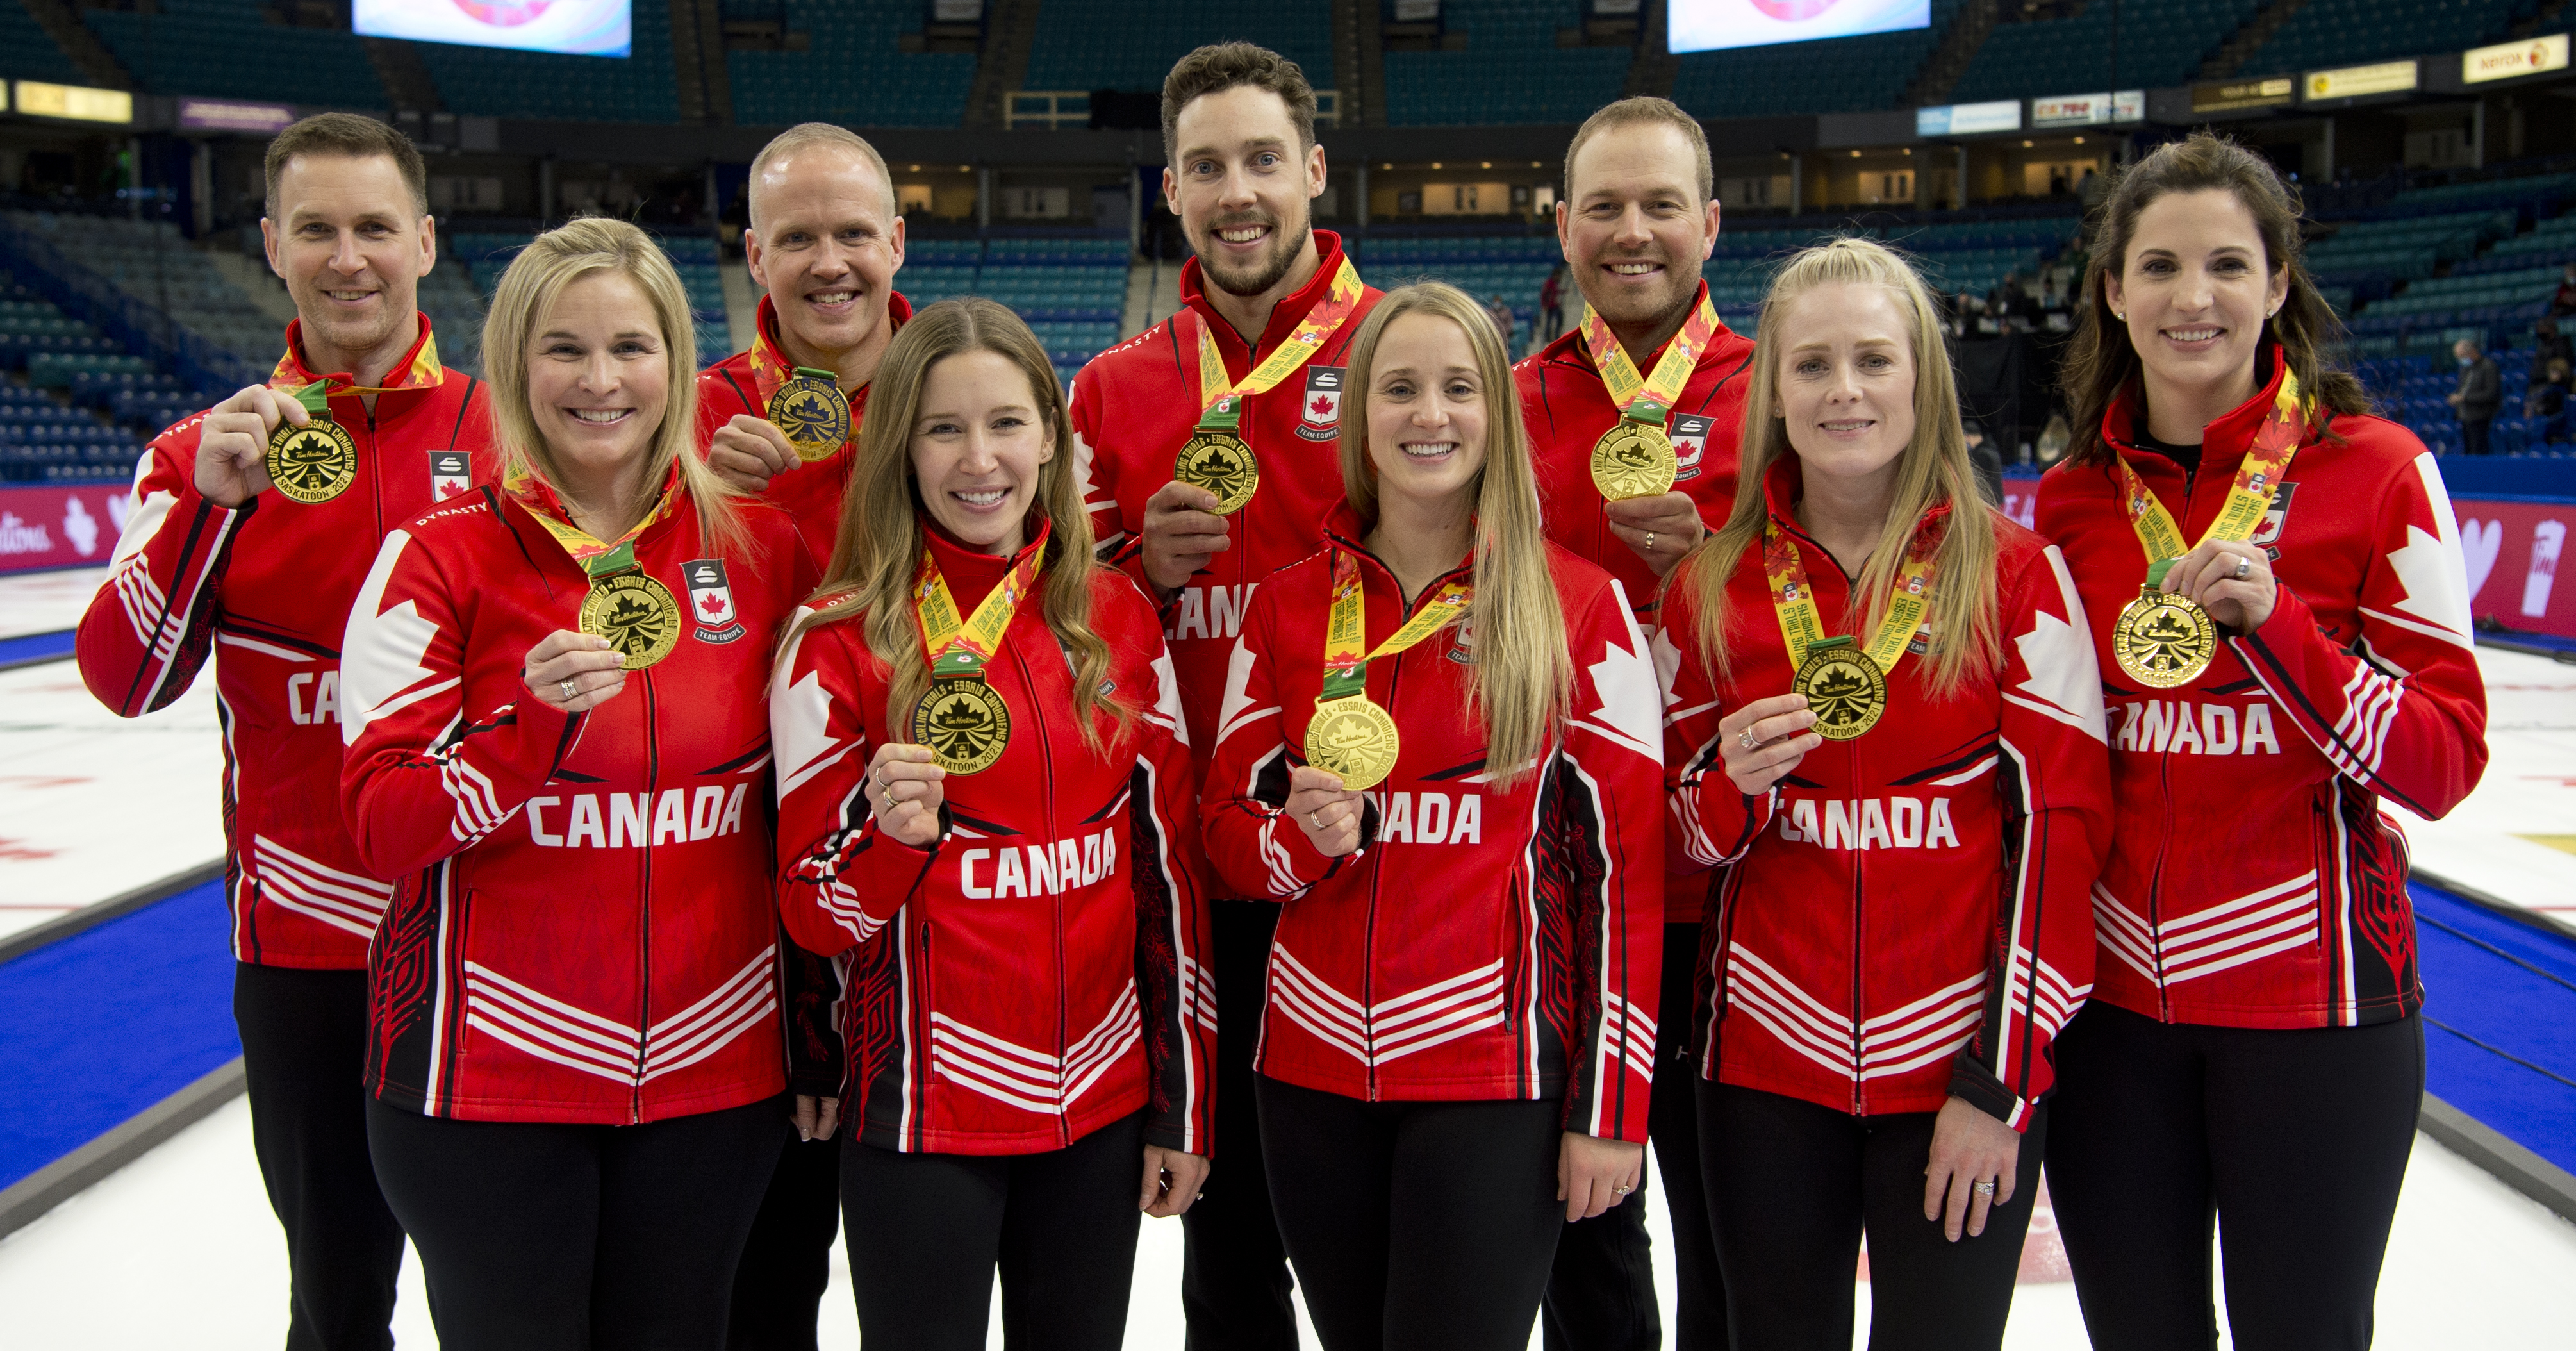 Team Canada S Olympic Curling Schedules For Beijing 22 Team Canada Official Olympic Team Website